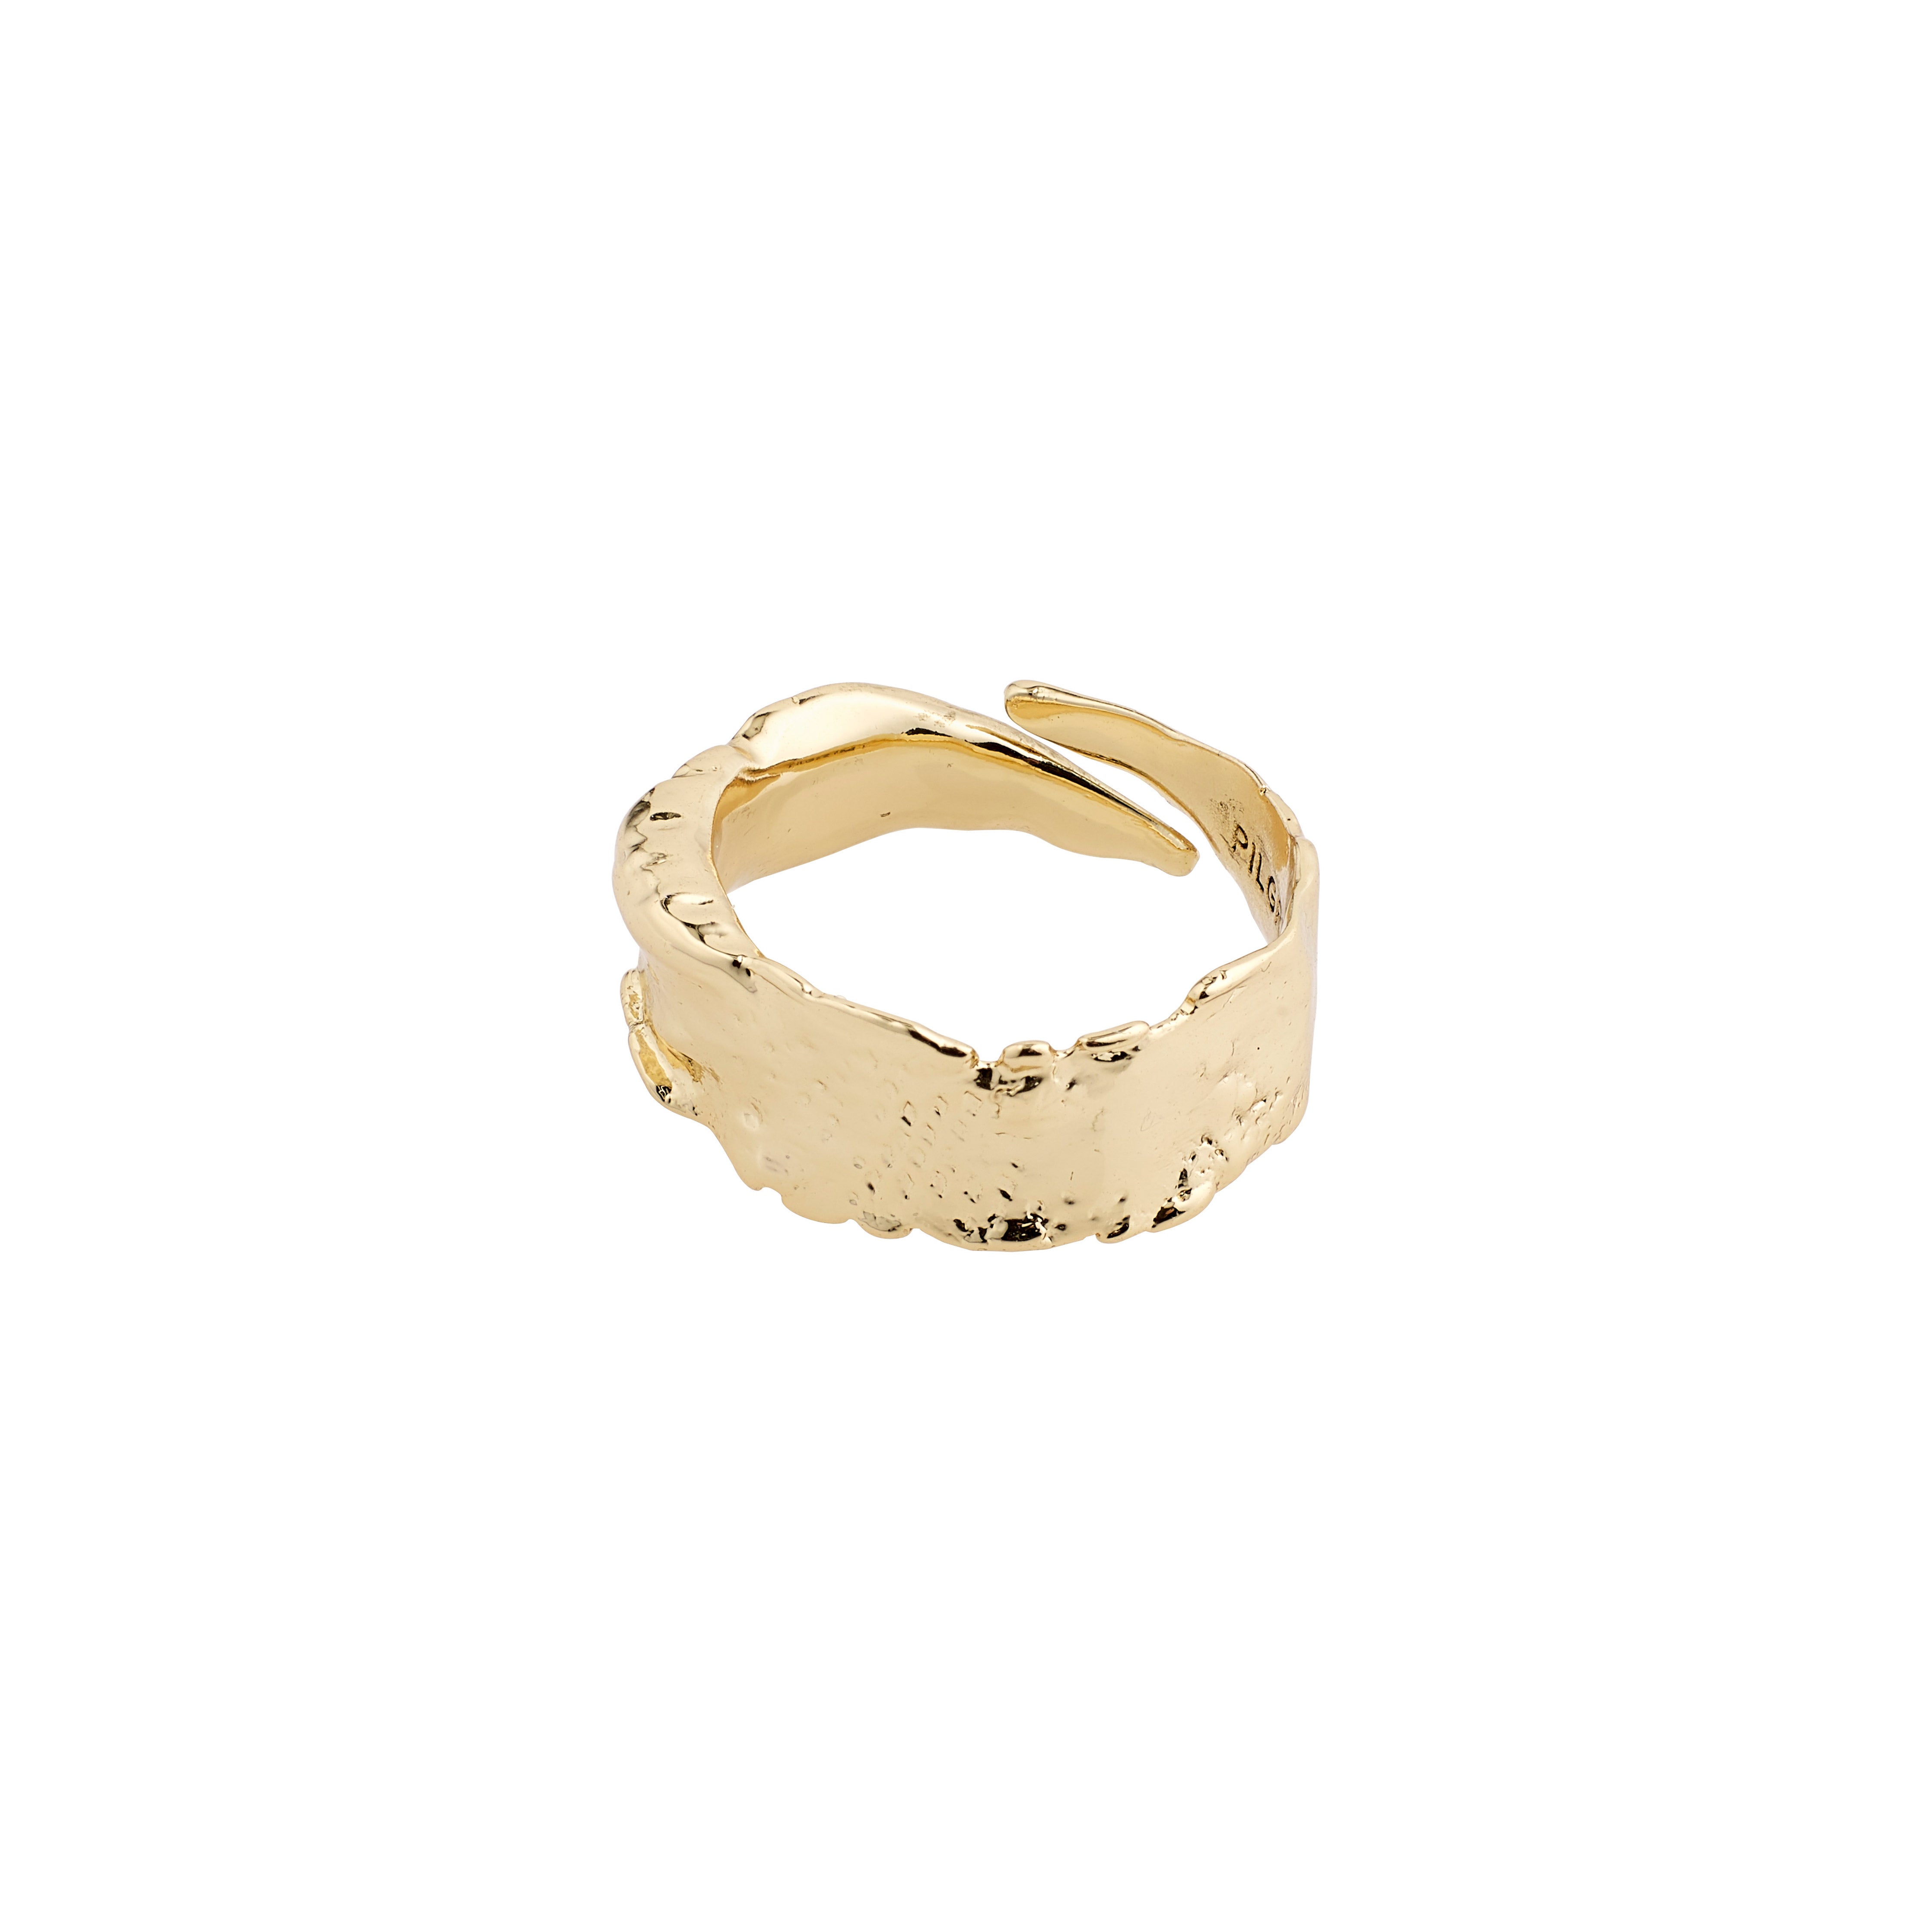 BATHILDA recycled rustic ring gold-plated